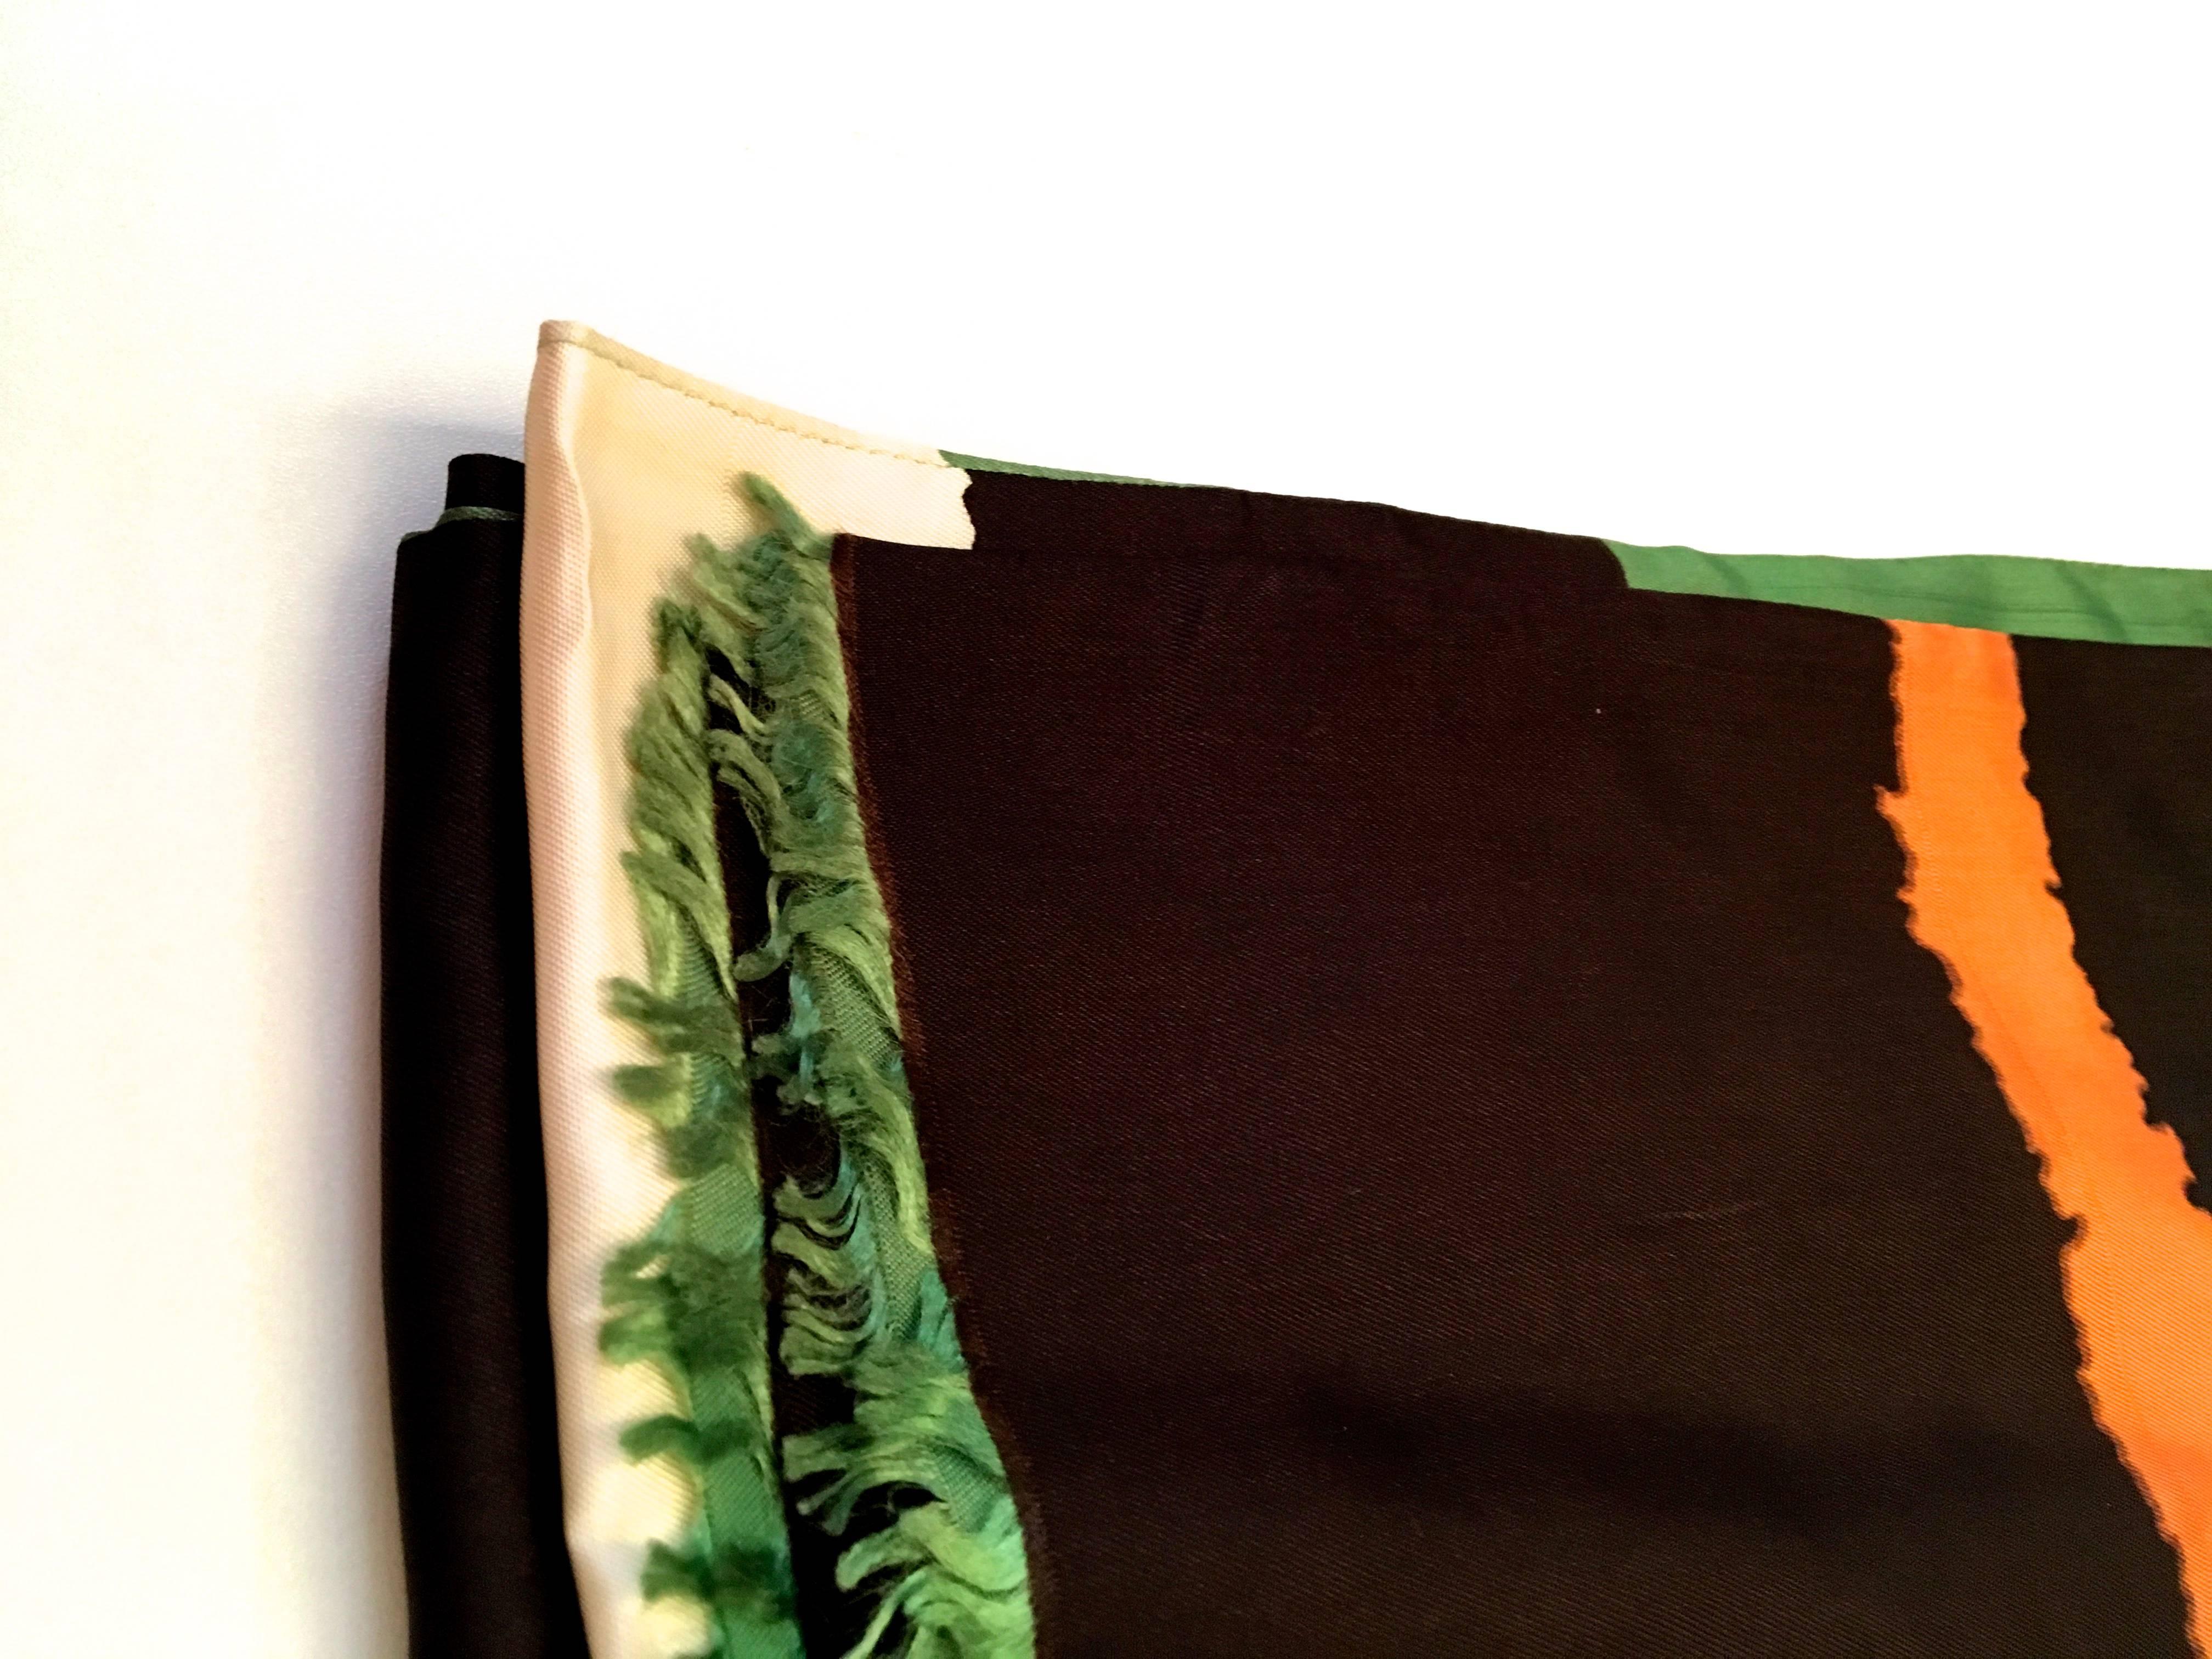 Presented here is a beautiful vintage scarf from the 1960's. This scarf is comprised of colors of orange, green, brown and  a cremish white. The colors are each illustrated in a series of thick solid color bars that stretch down the length of the